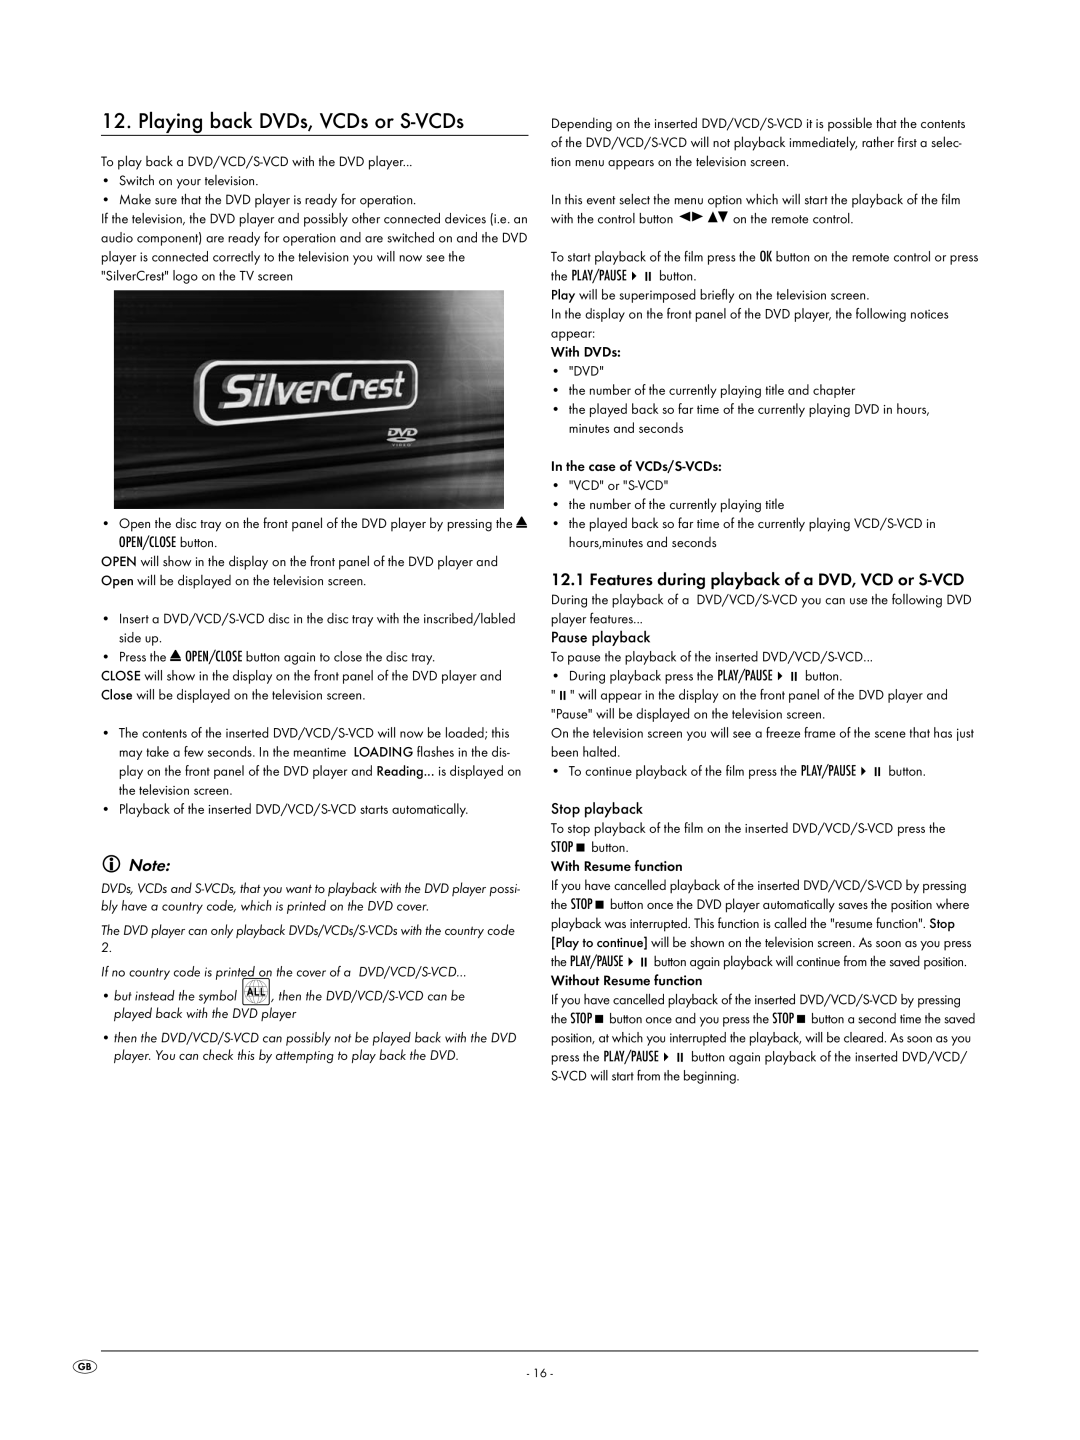 Silvercrest KH6519 Playing back DVDs, VCDs or S-VCDs, Features during playback of a DVD, VCD or S-VCD, Pause playback 